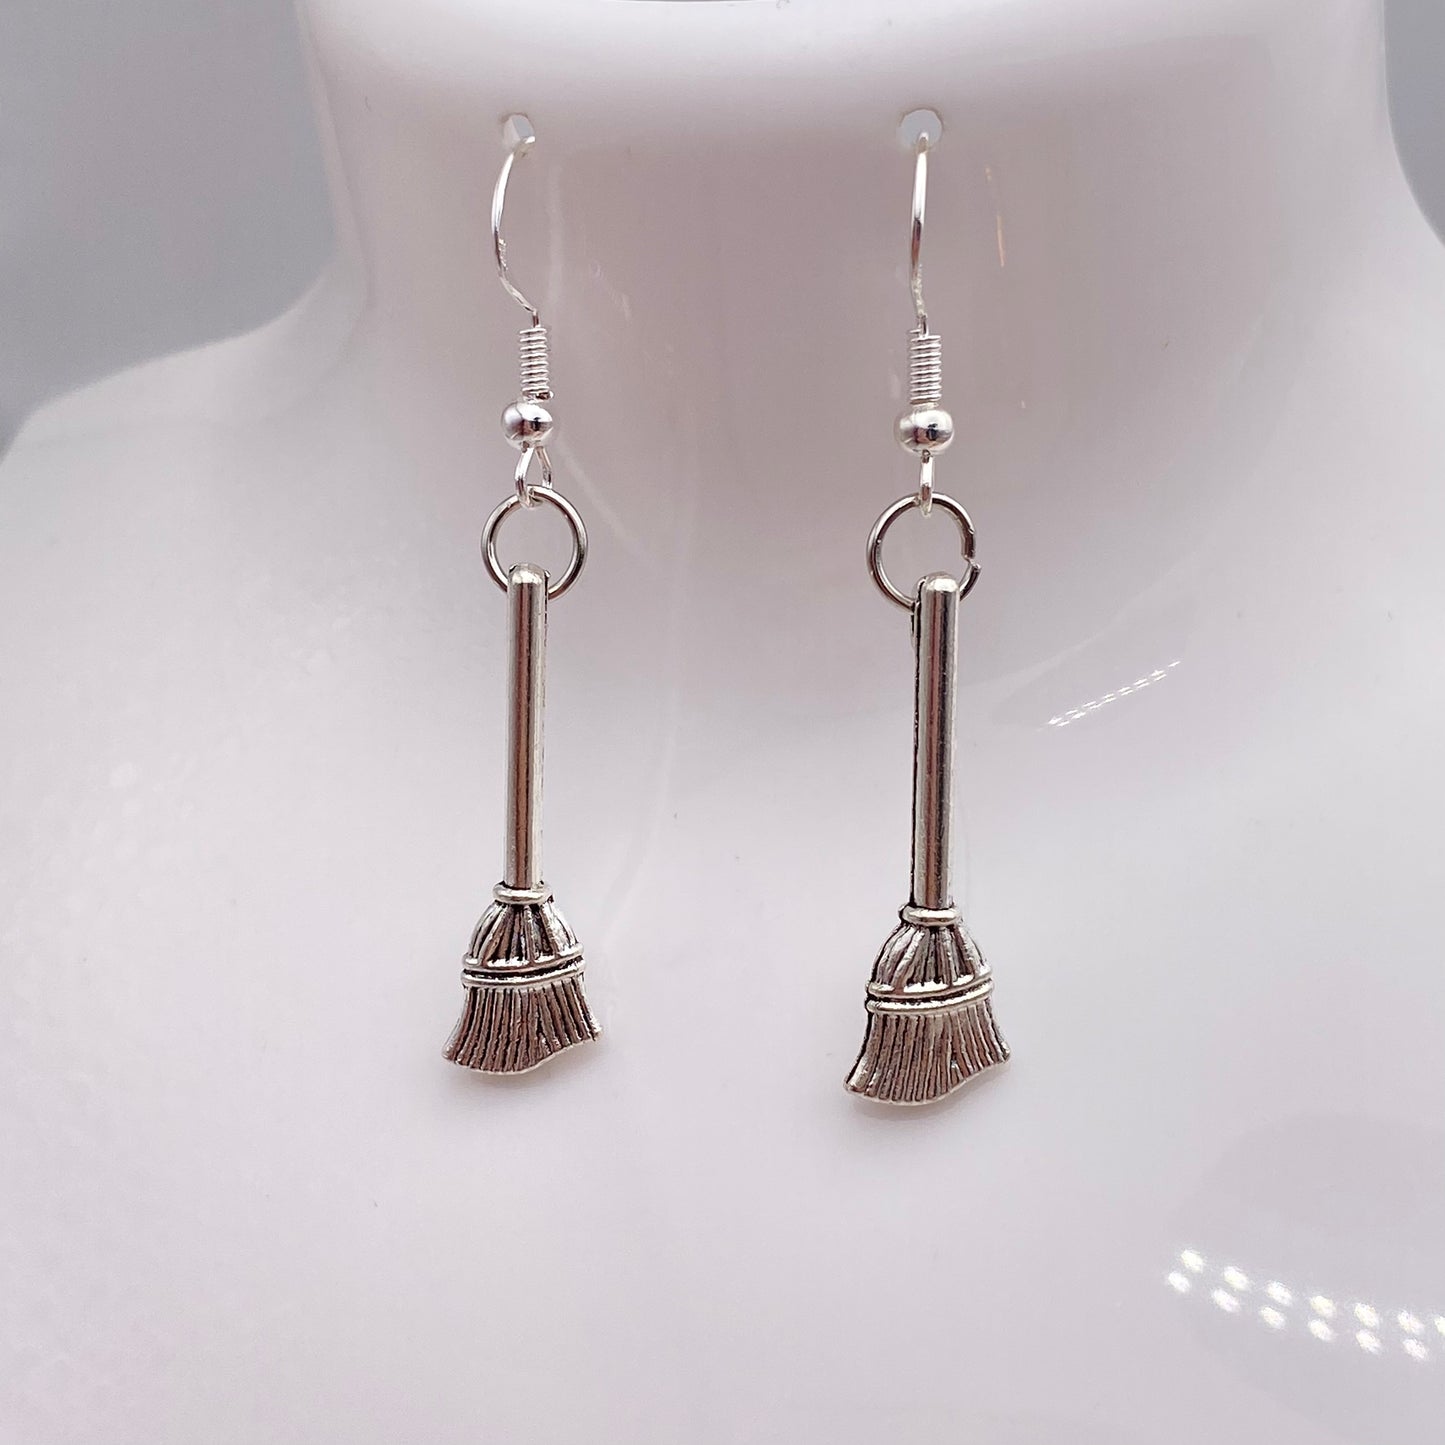 Witch Broomstick Earrings